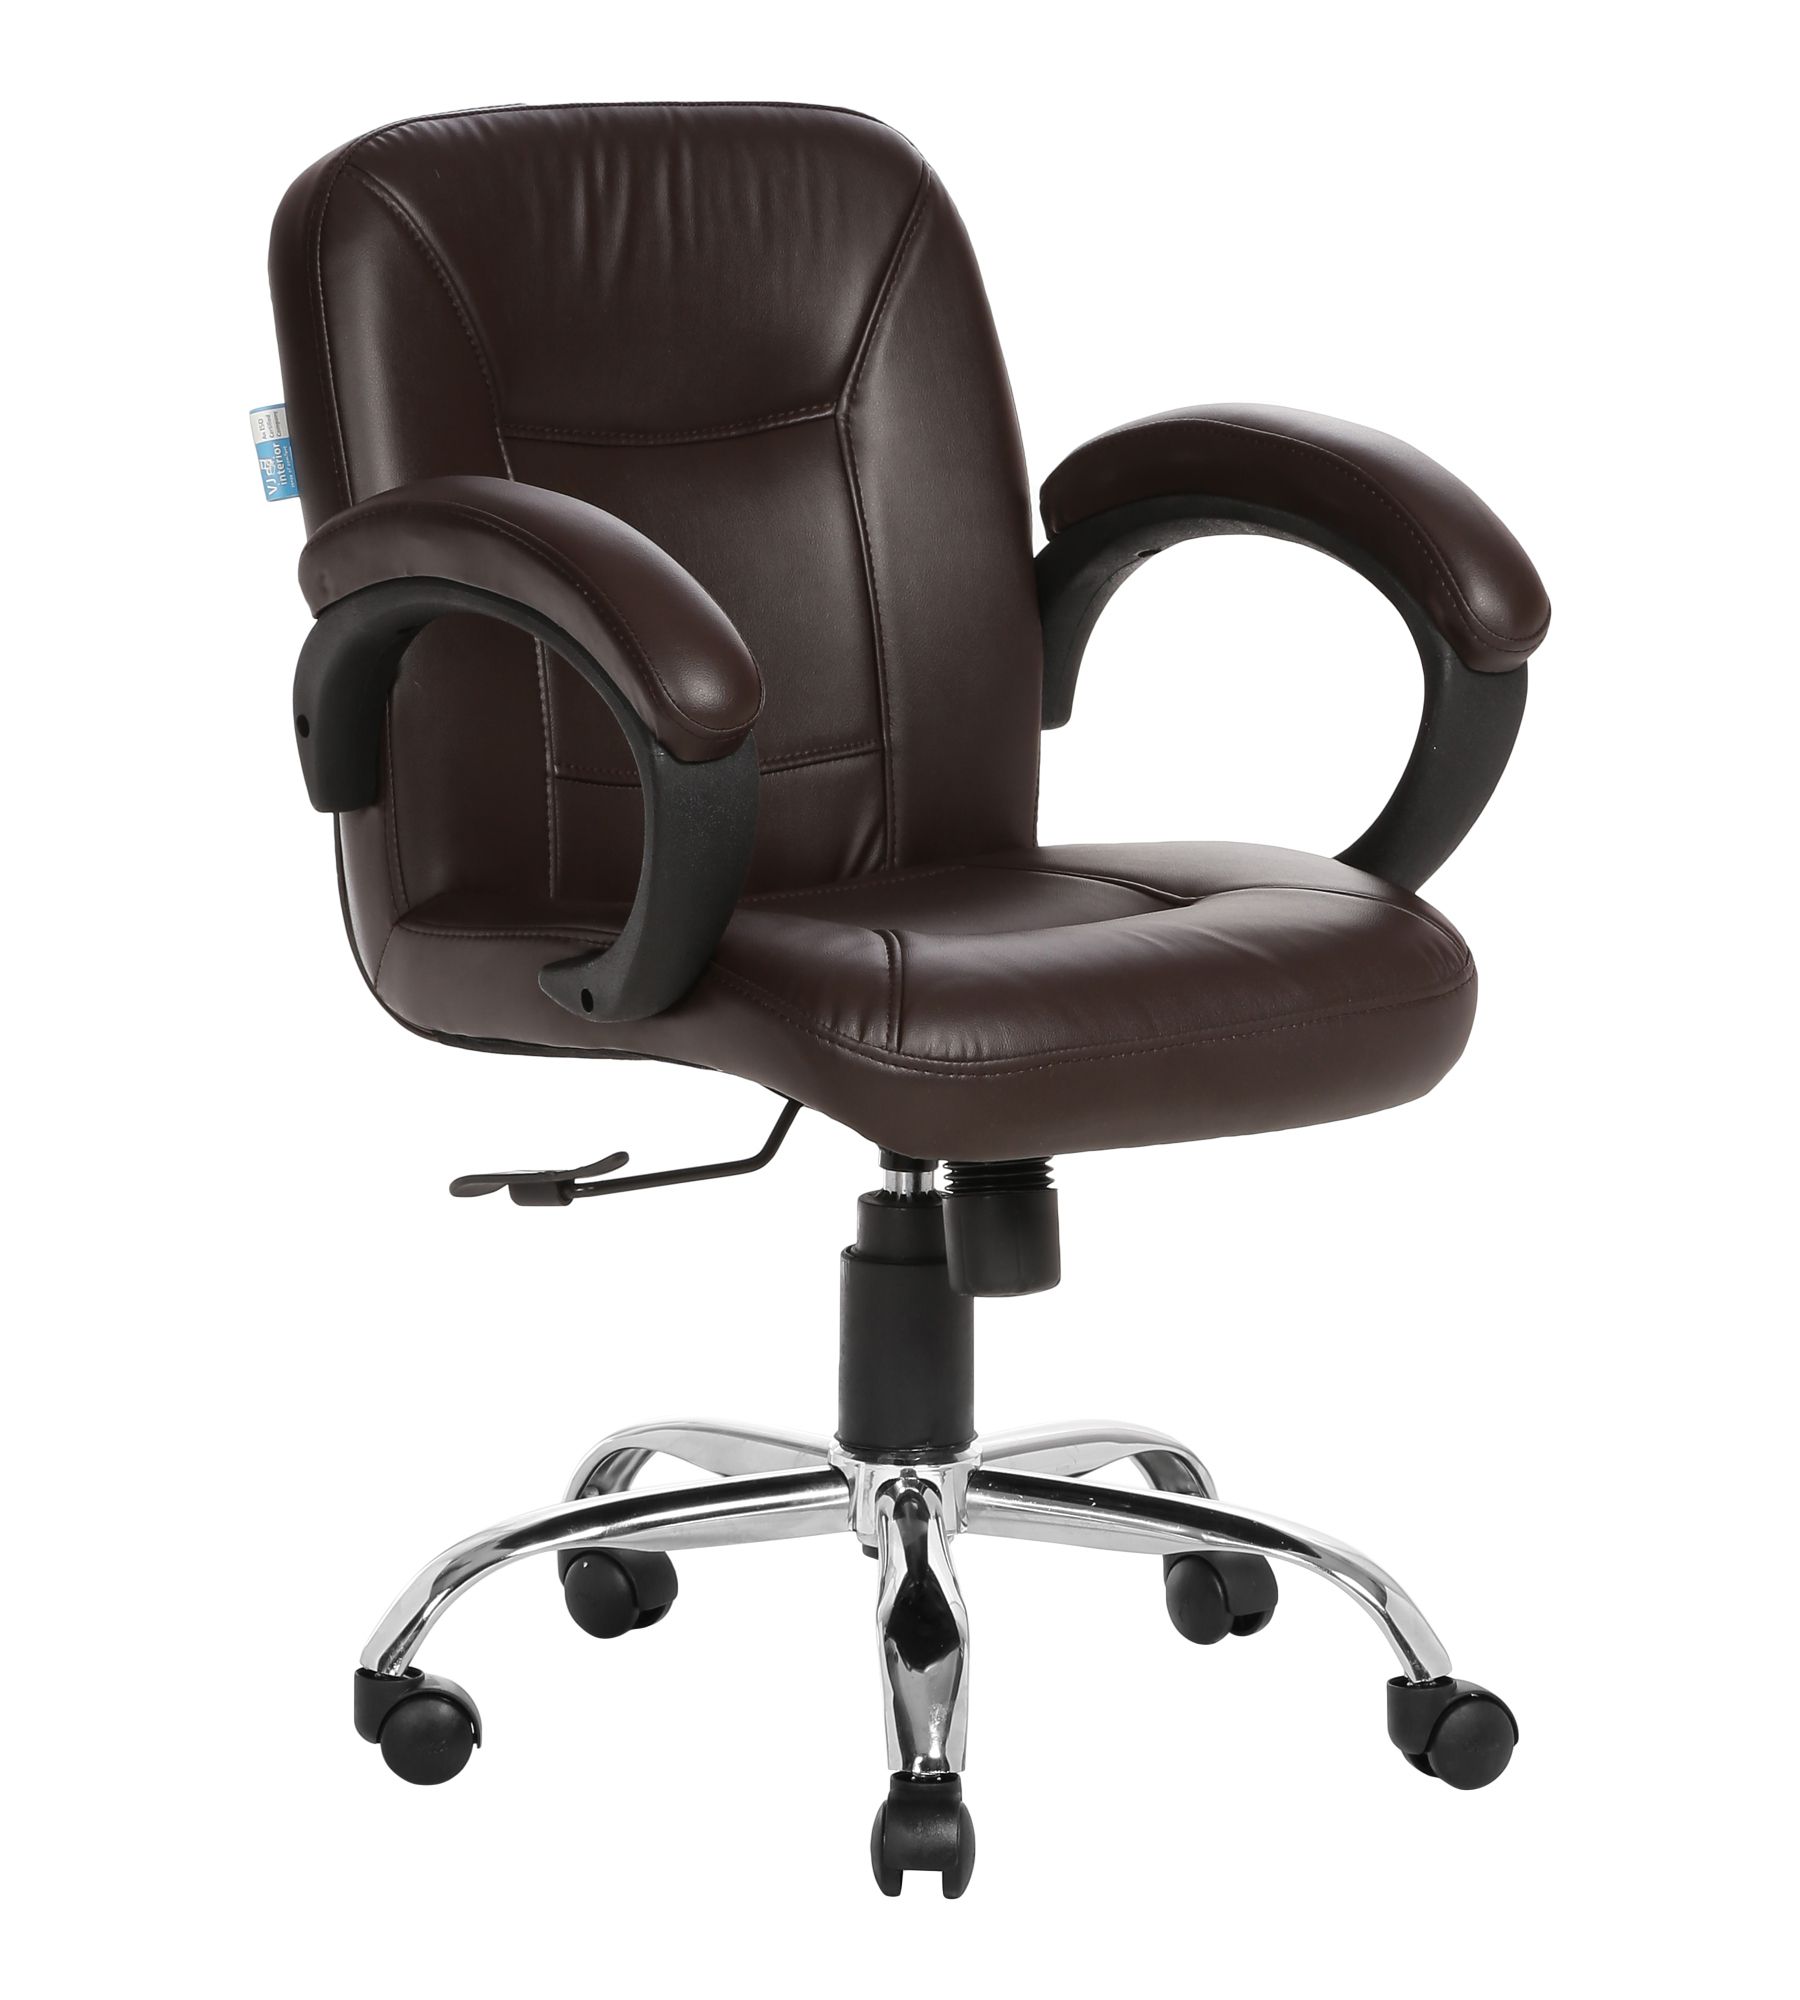 LOW BACK TASK CHAIR BROWN COMBO - Buy LOW BACK TASK CHAIR BROWN COMBO